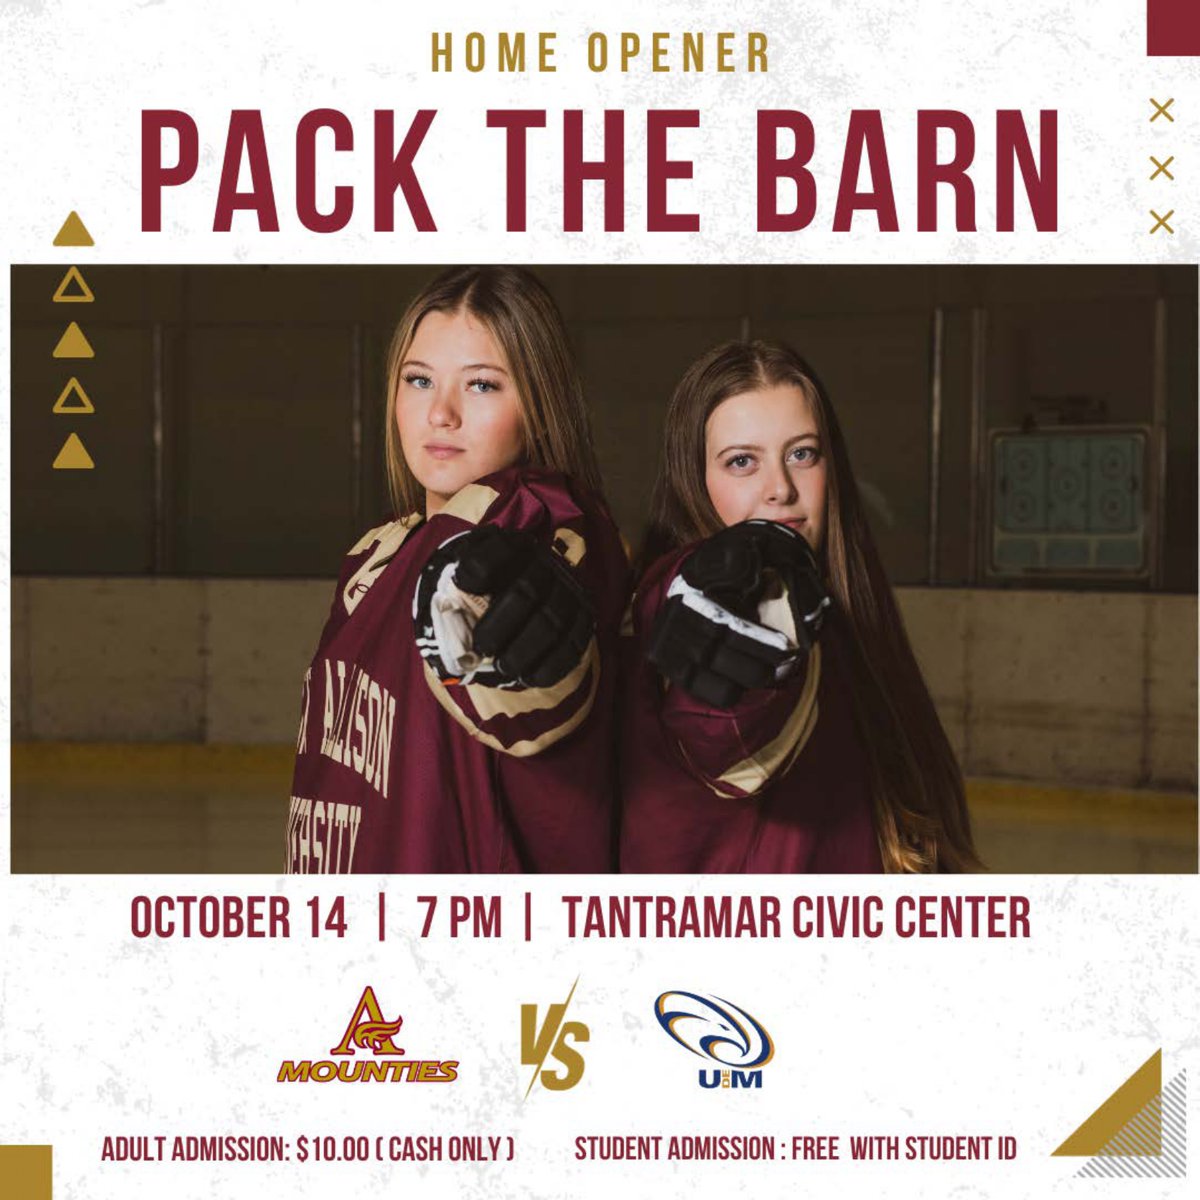 🏒 MtA Women's Hockey Home Opener! 🥅
📣 Let's 'PACK THE BARN'!
📅 Oct 14, 7PM @ Tantramar Civic Center
🎟️ Adults: $10 (CASH ONLY)
🎟️ Students: FREE with ID

Mounties 🆚 UdeM. Be there, bring the noise! 🌟
#MountiePride #PackTheBarn